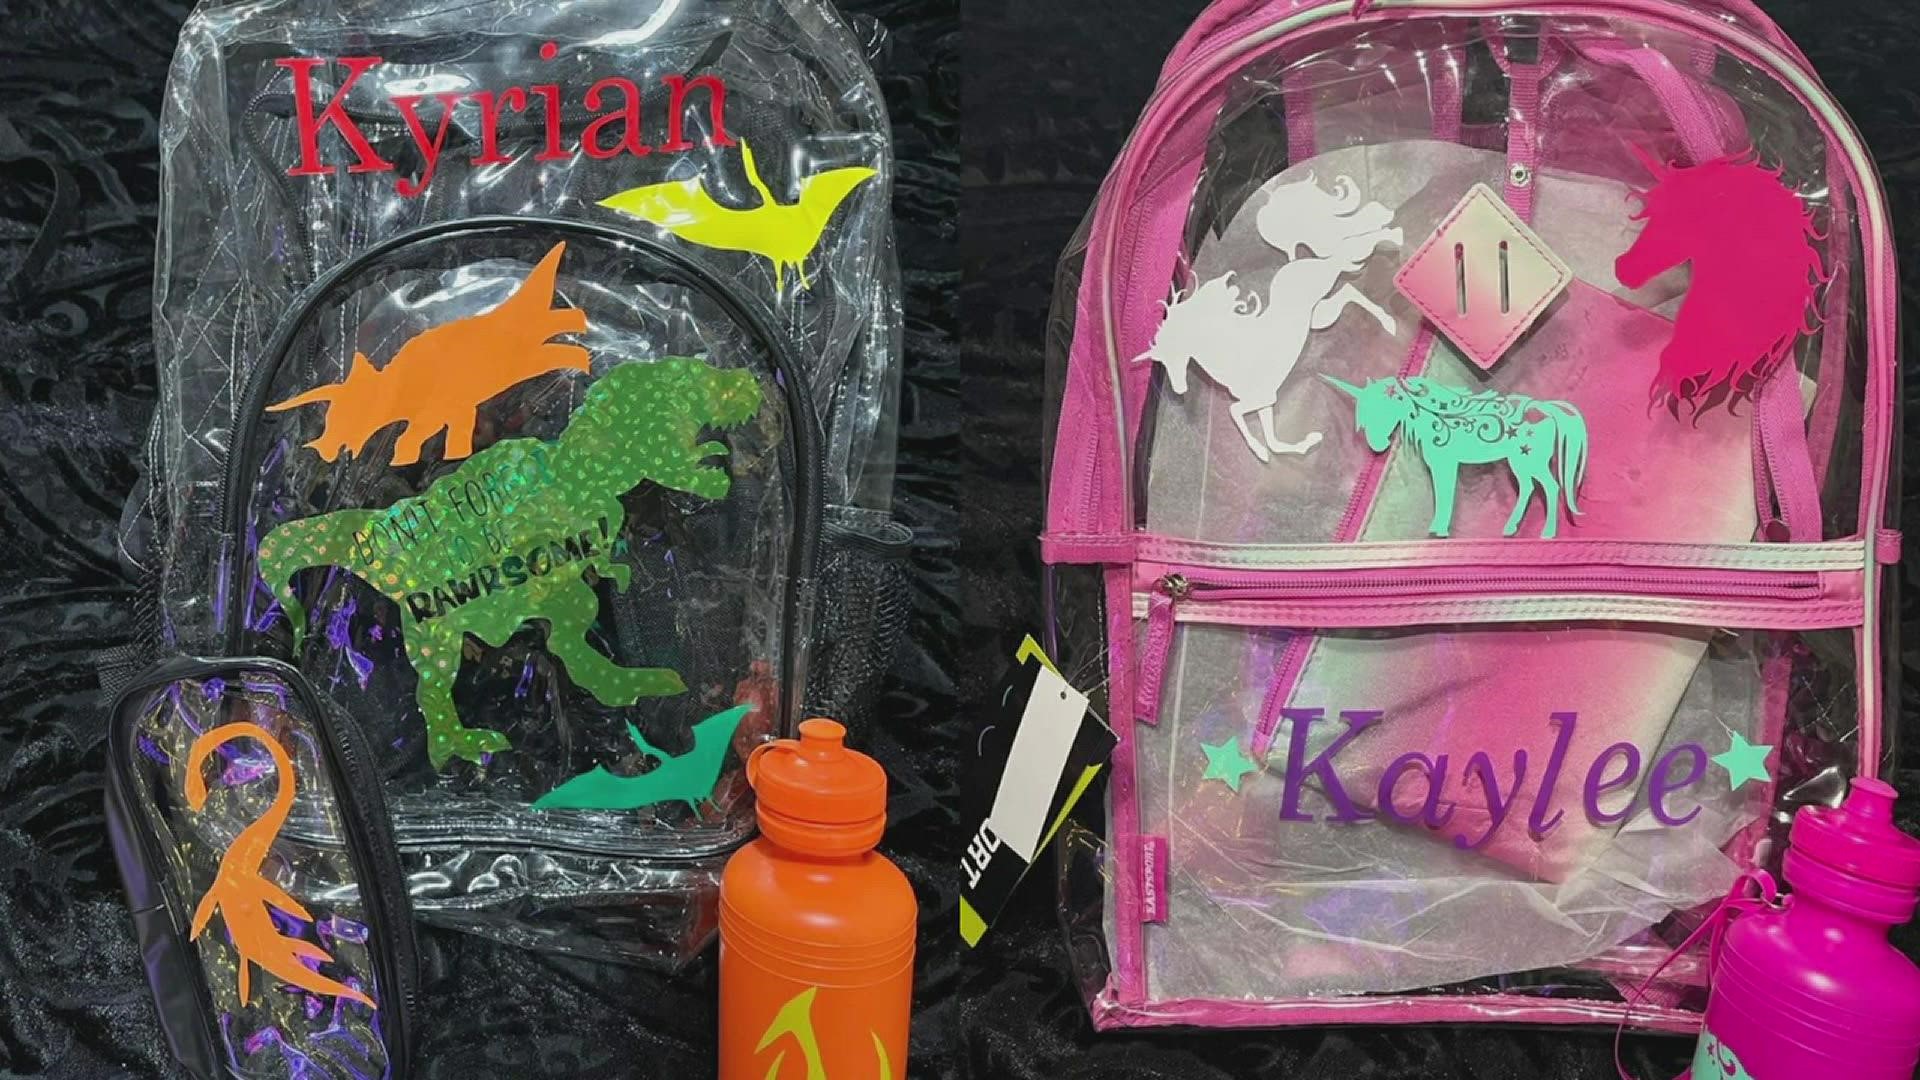 Whether it’s baseball, Star Wars, or an LOL doll, Rekell Williams, of Beaumont, can add some personal décor to your child's plain, clear backpack.